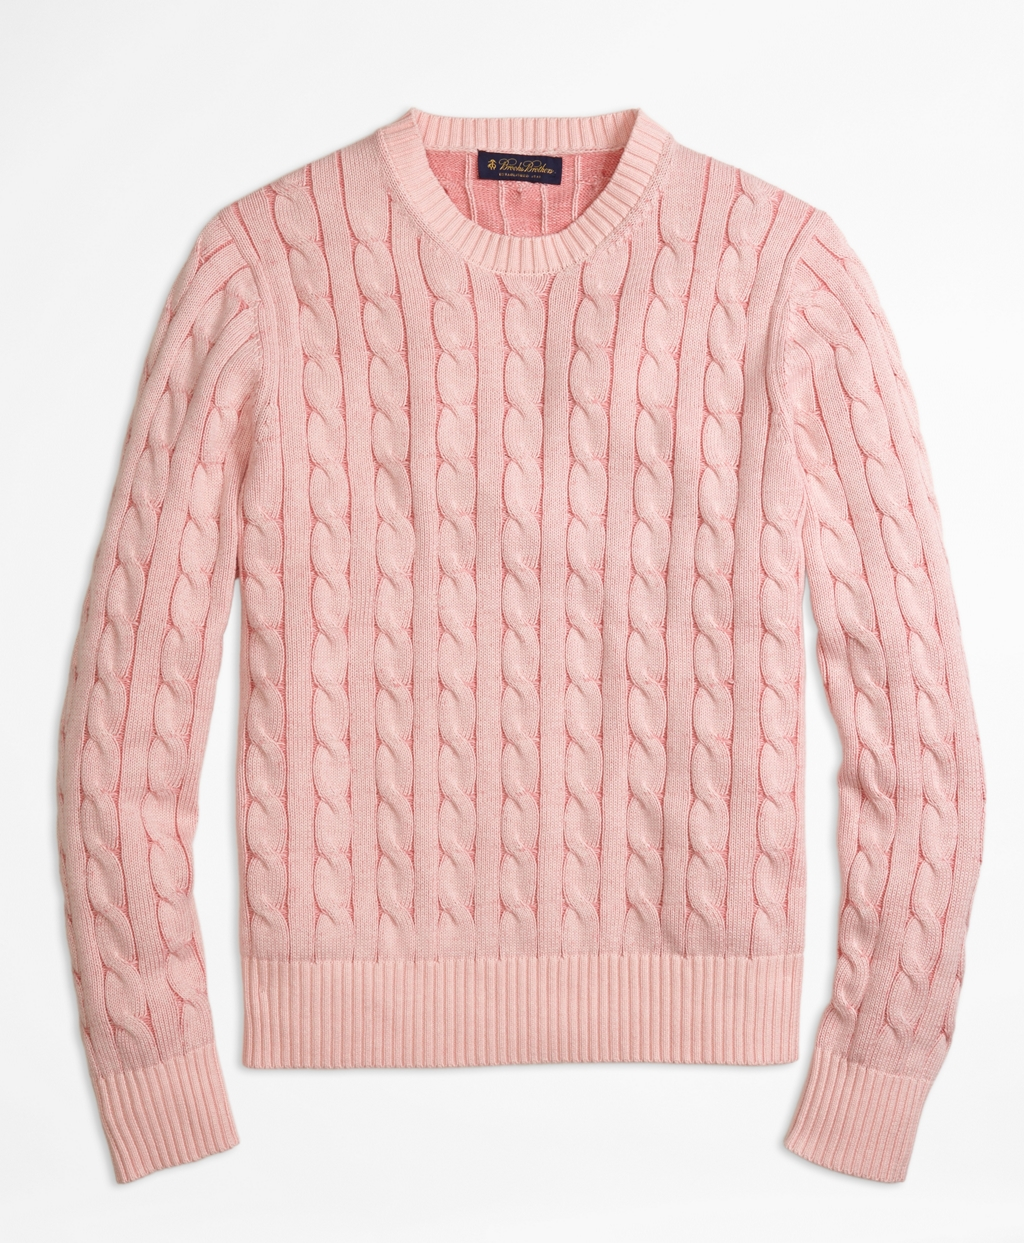 Brooks brothers Heathered Cable Knit Crewneck Sweater in Pink for Men ...